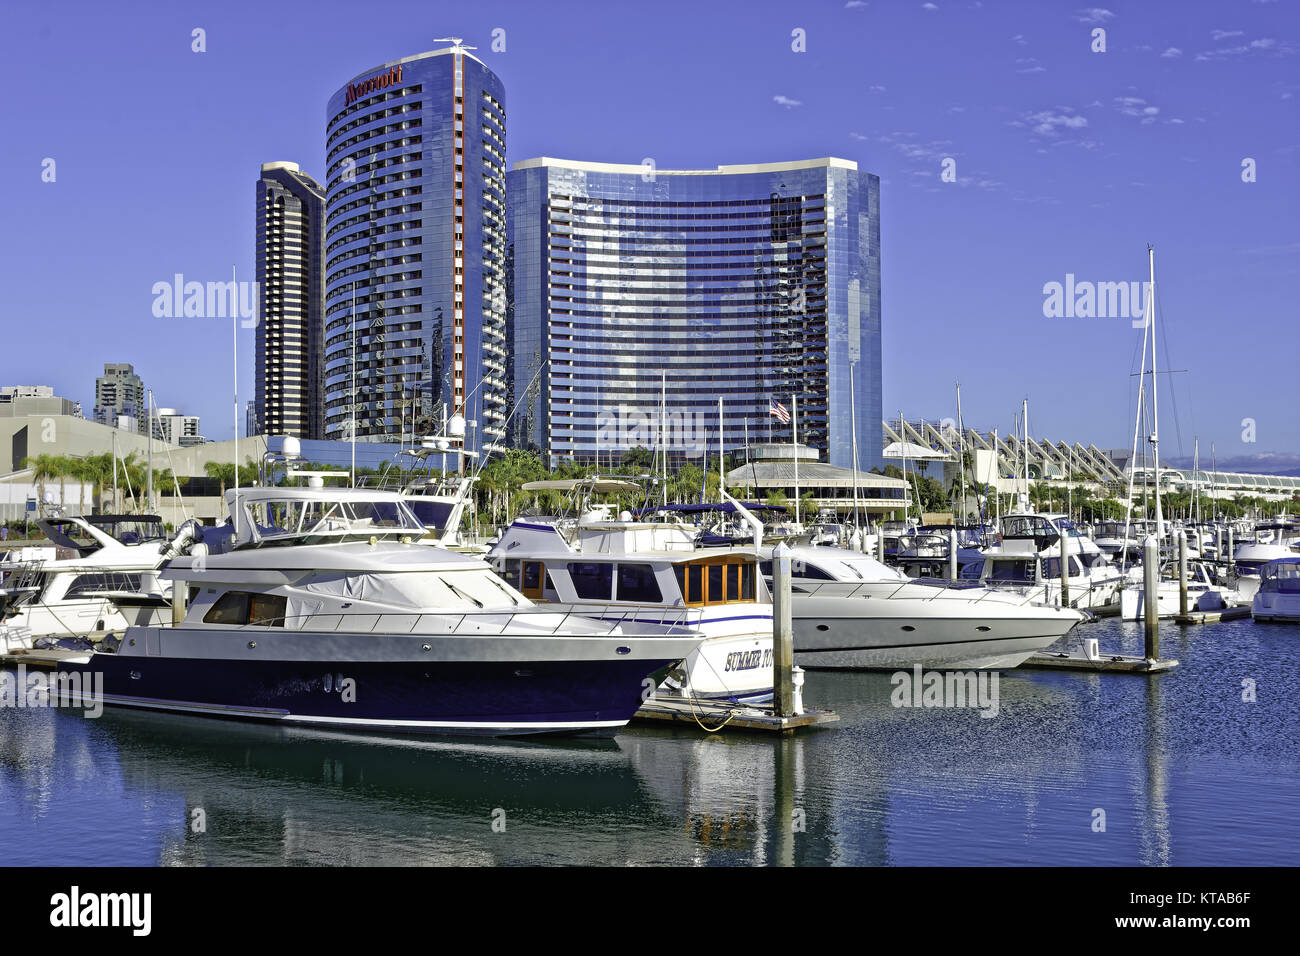 SAN DIEGO, CLAIFORNIA USA - NOVEMBER 5, 2017: Luxury yachts in Embarcadero Marina near Seaport Village in San Diego Bay with the San Diego skyline and Stock Photo